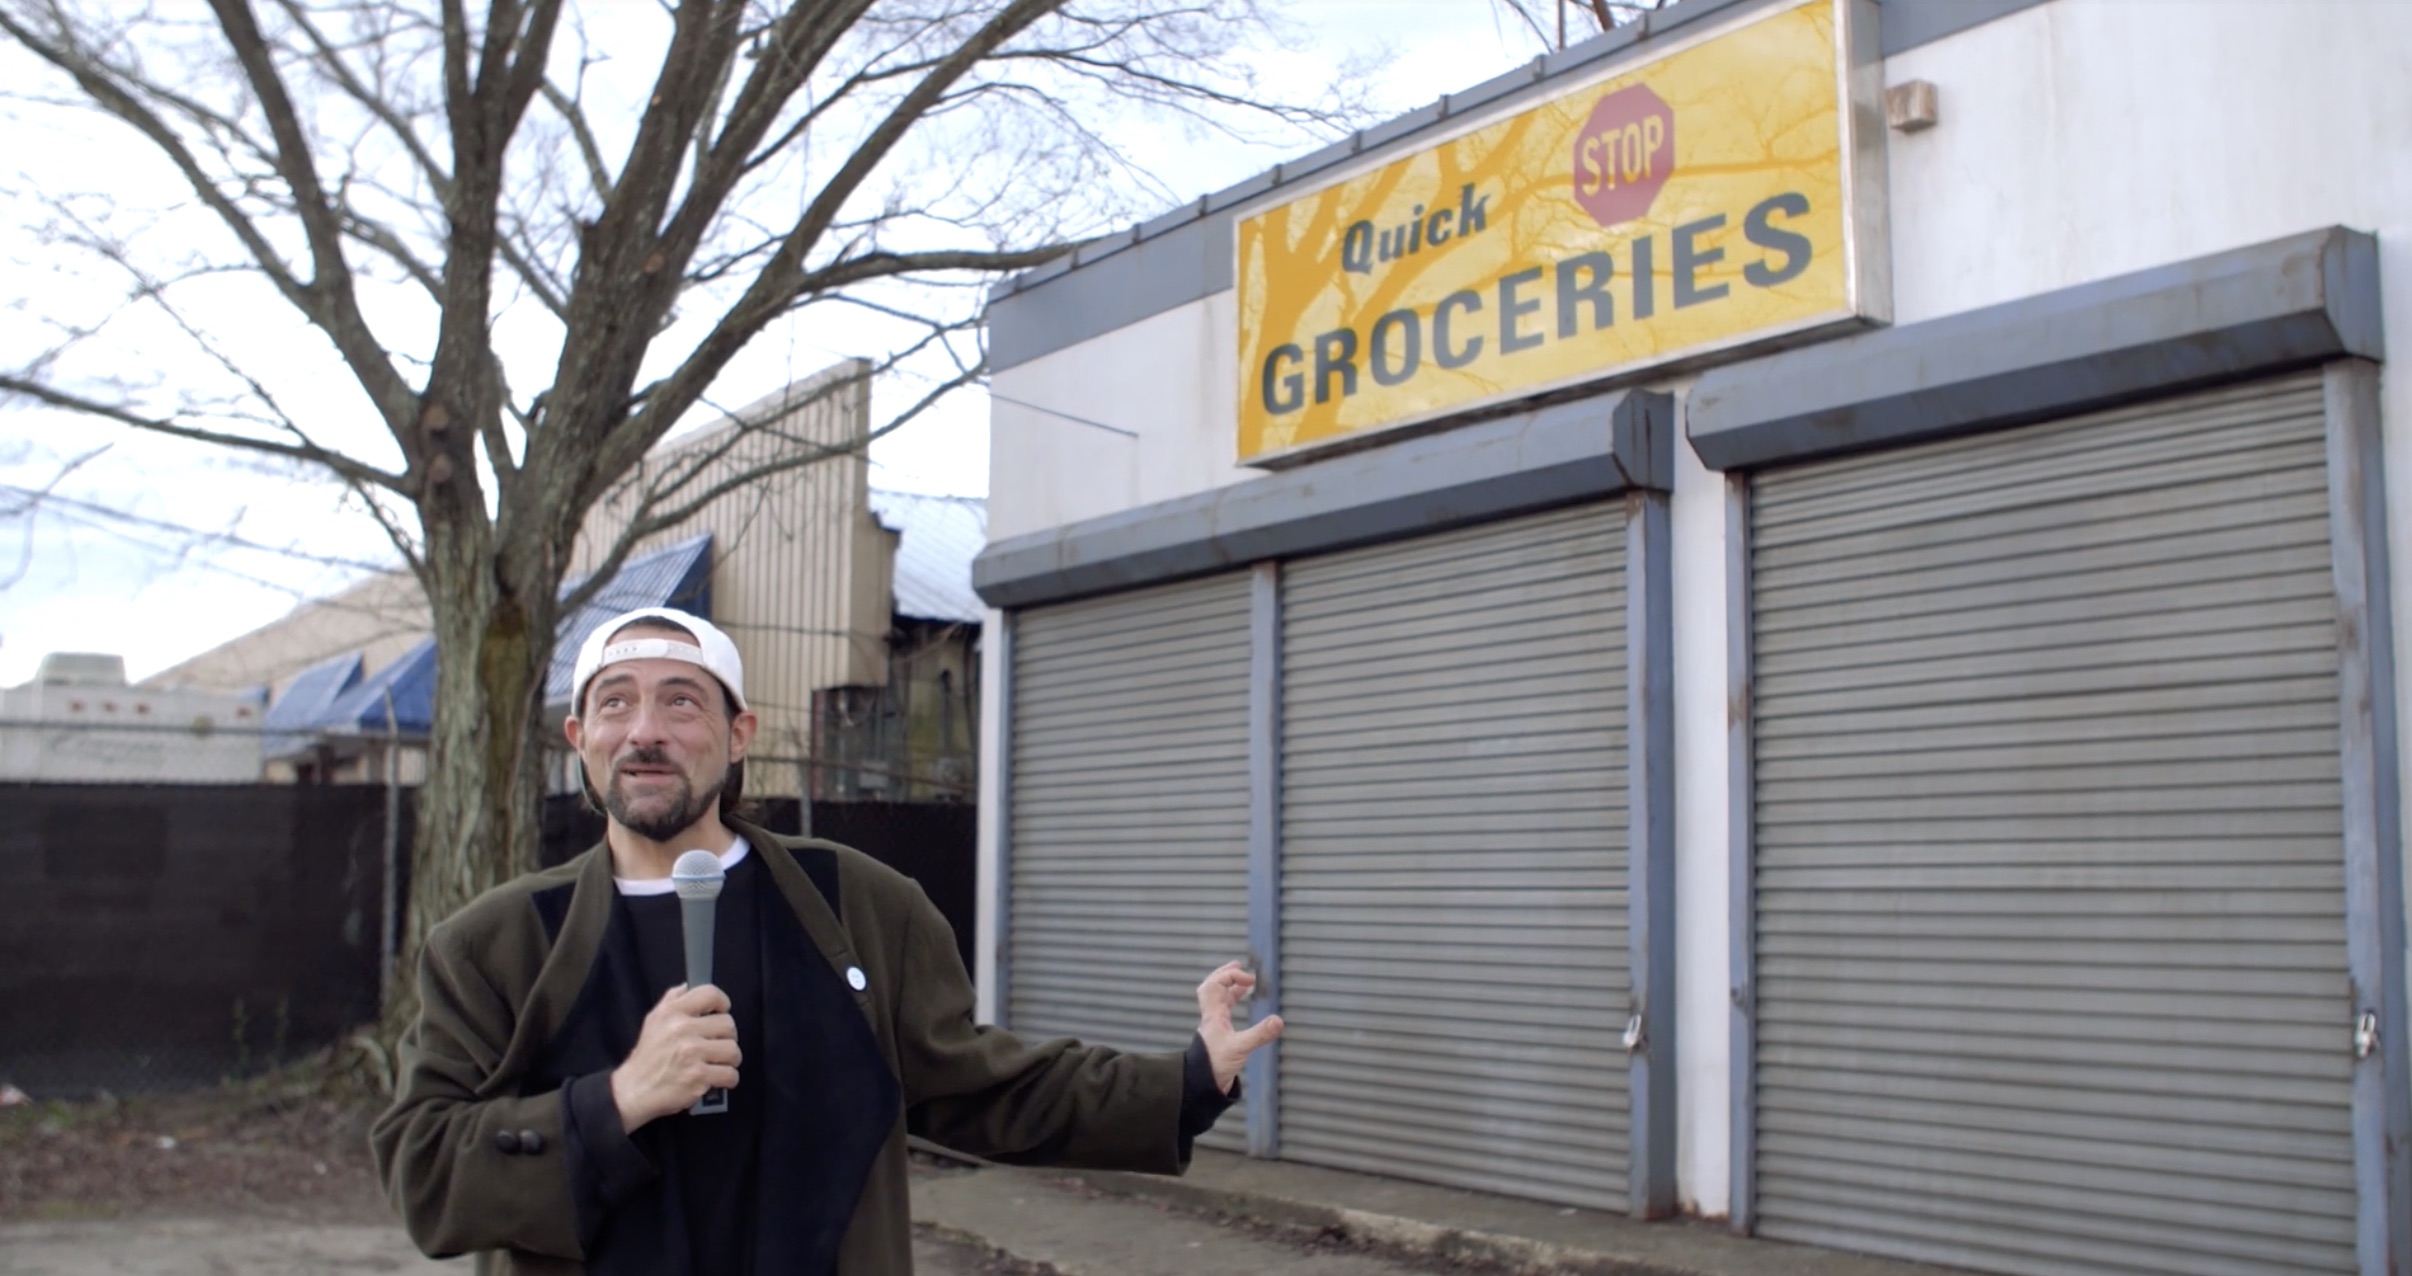 Jay And Silent Bob Reboot Builds Quick Stop In Louisiana New Production Video